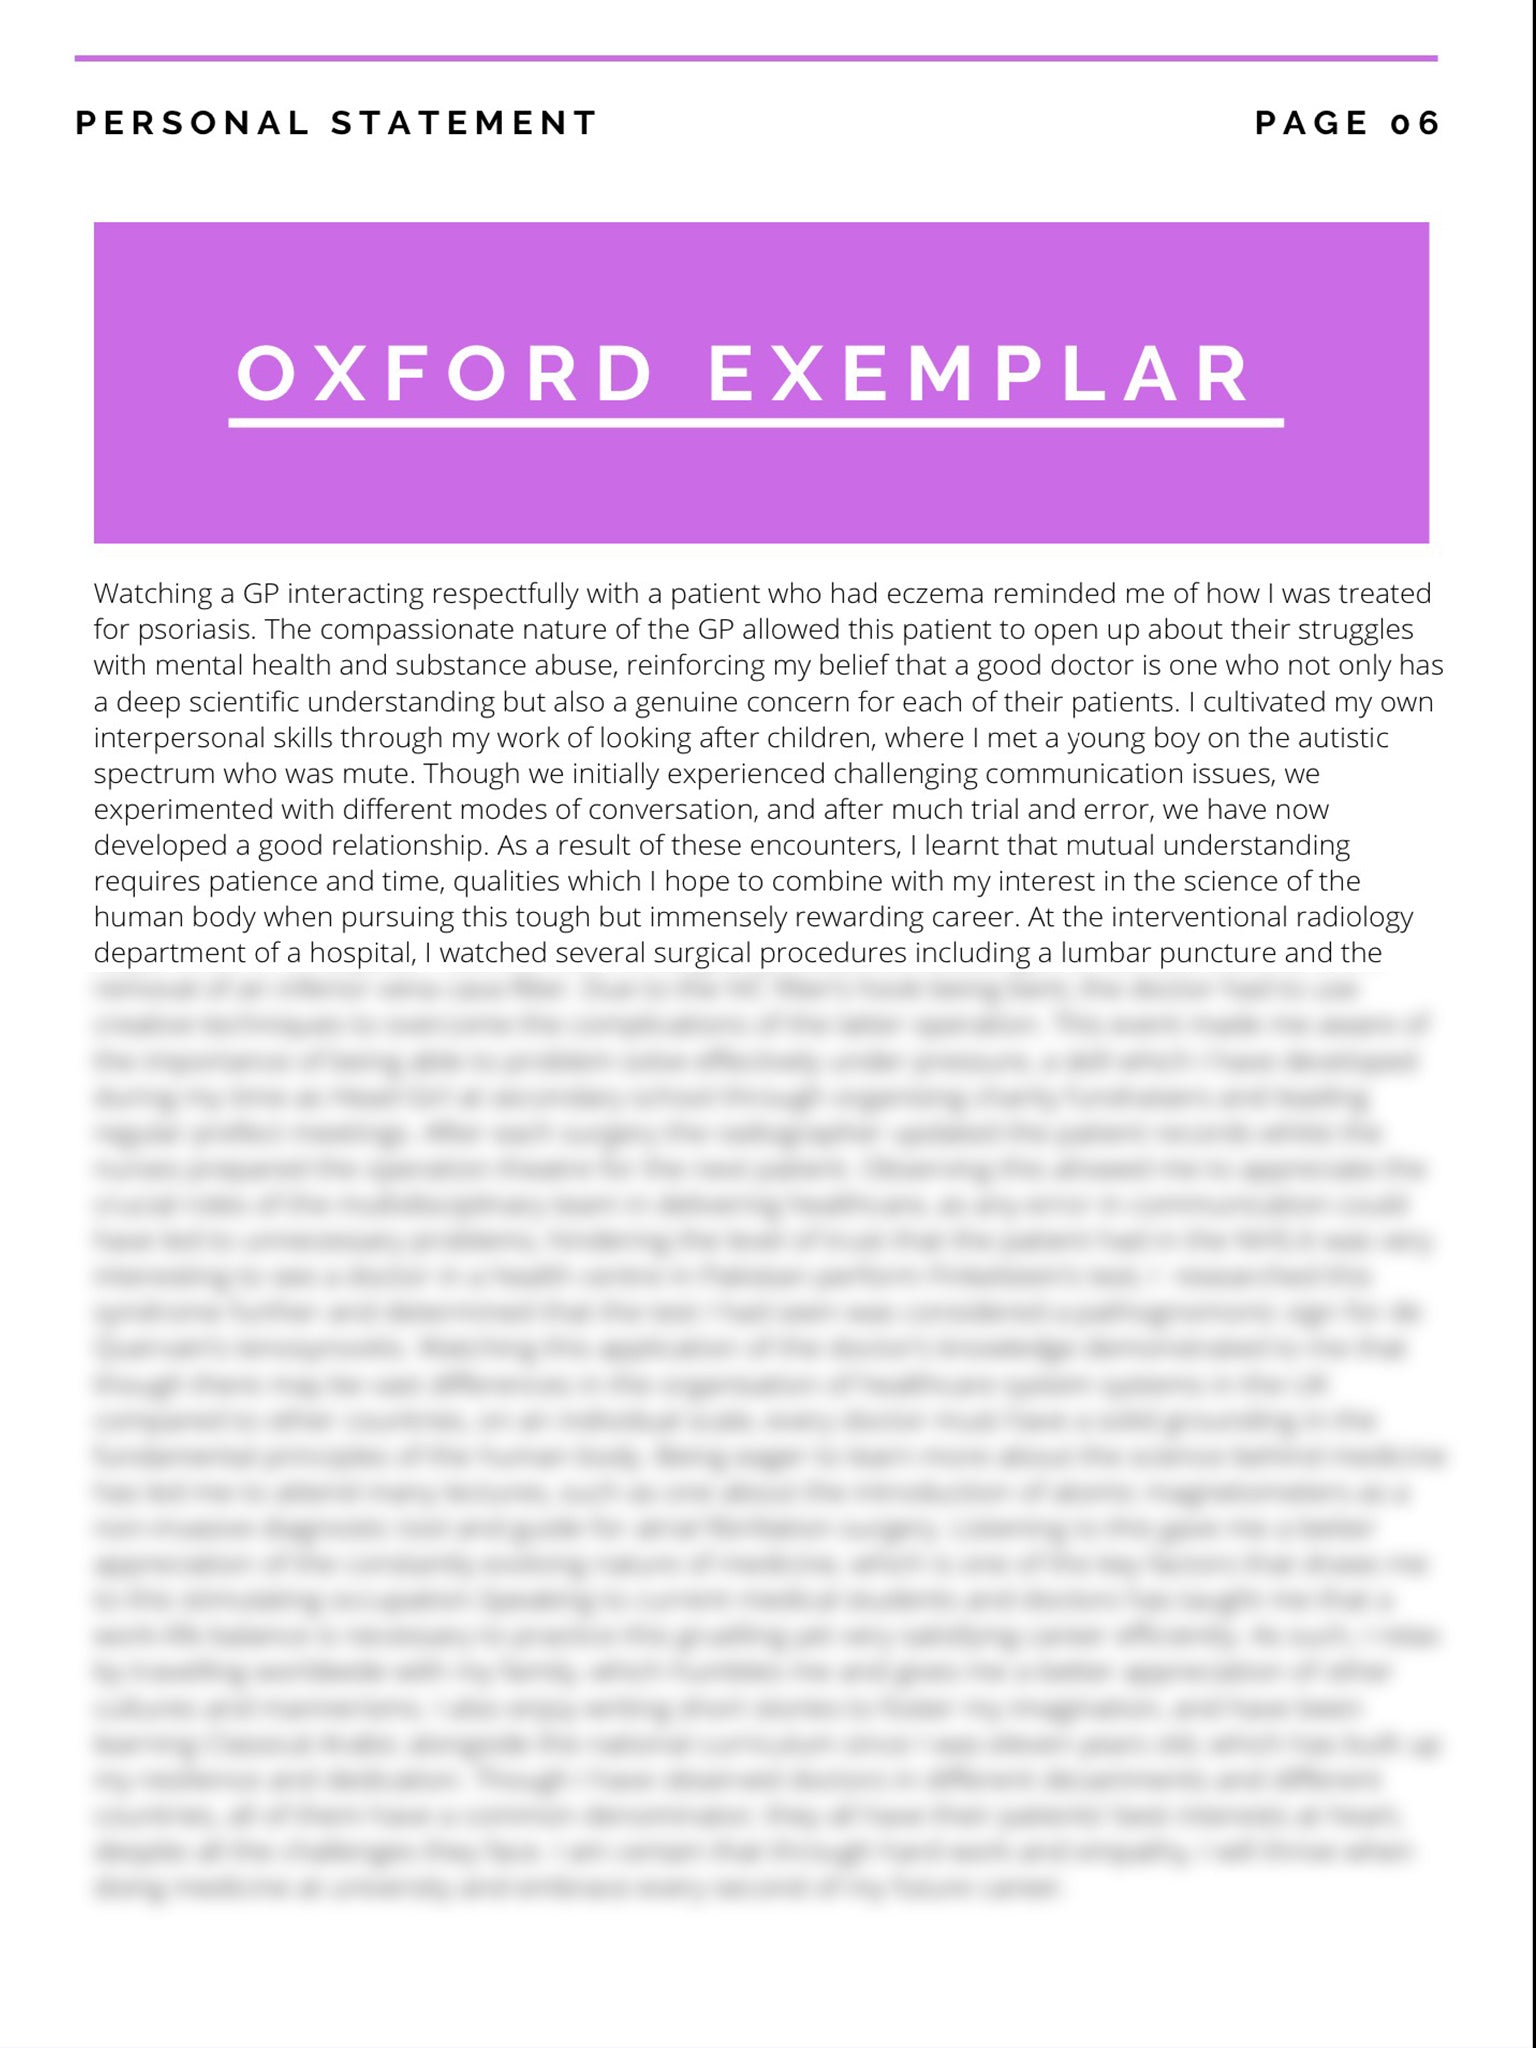 personal statement for oxford